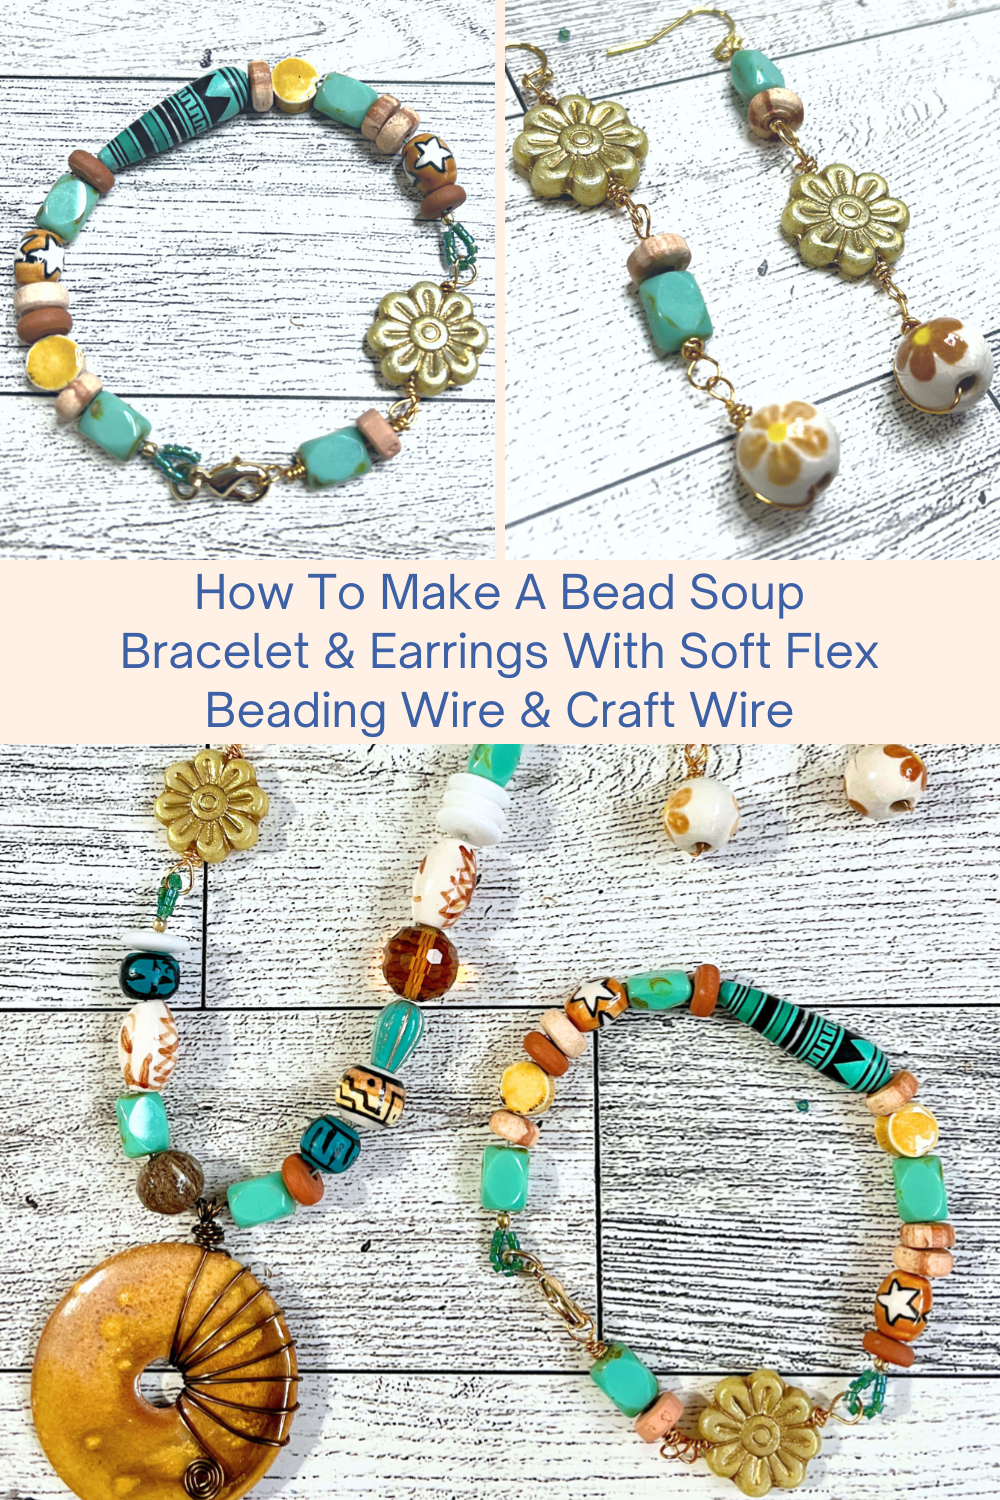 How To Make A Bead Soup Bracelet & Earrings With Soft Flex Beading Wire & Craft Wire Collage